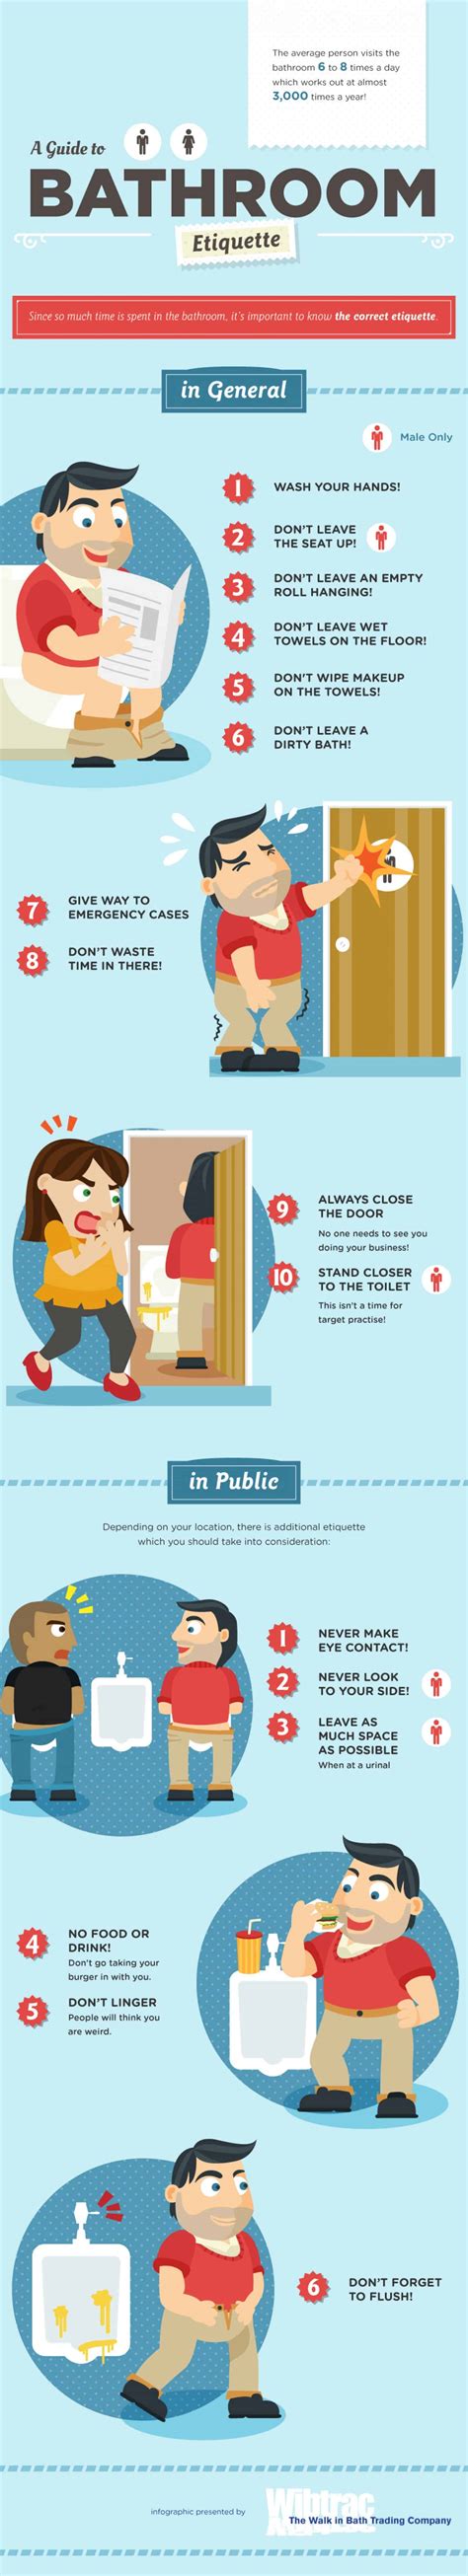 the ultimate guide to proper bathroom etiquette daily infographic